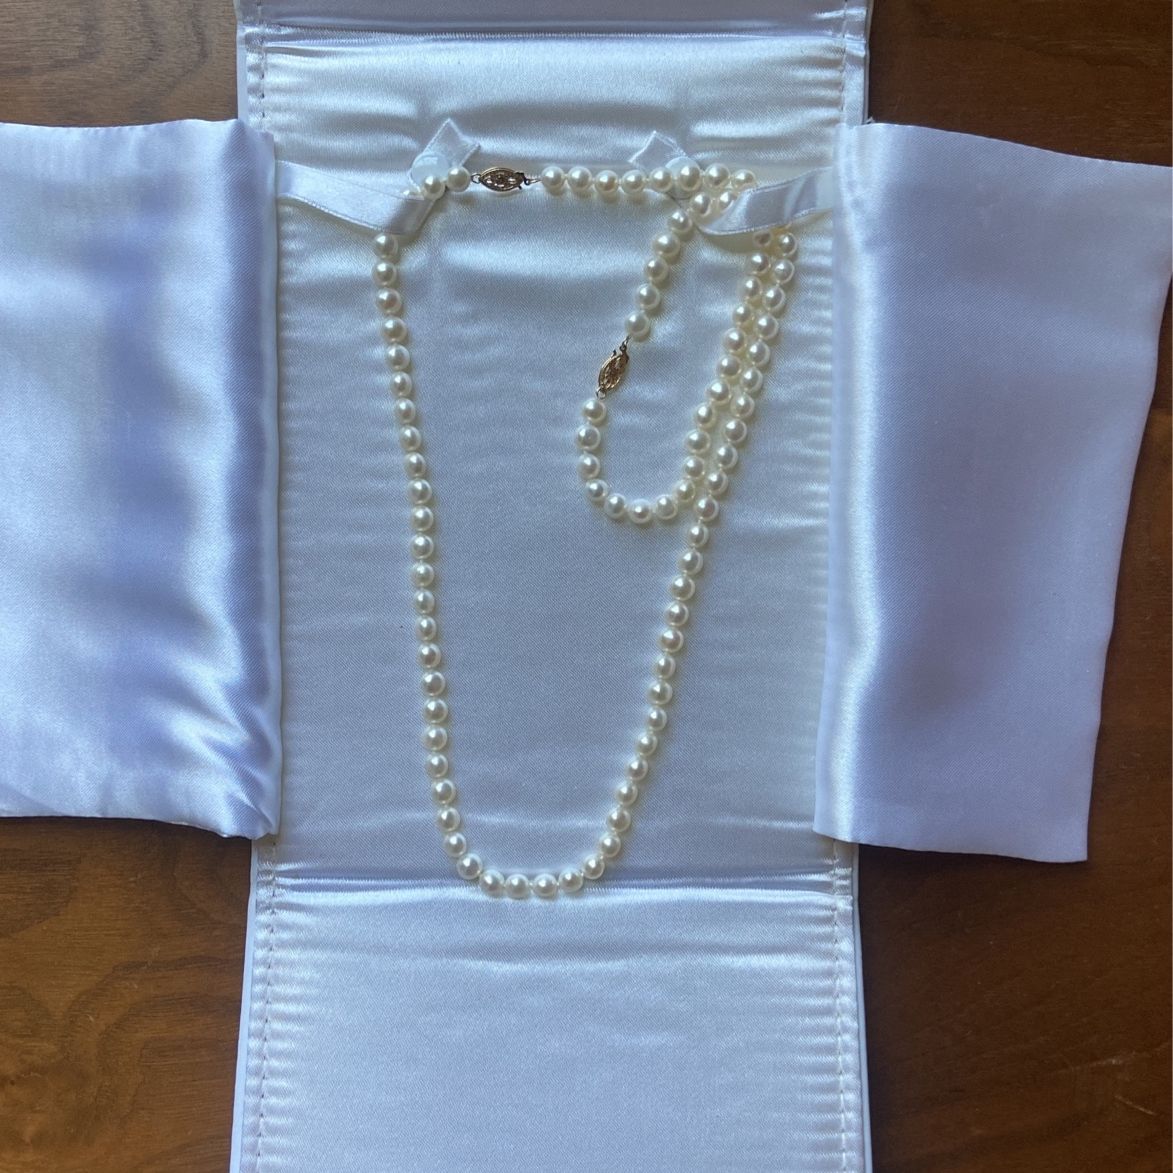 Saltwater Pearl Bracelet and Necklace Set for Sale in Tacoma, WA - OfferUp